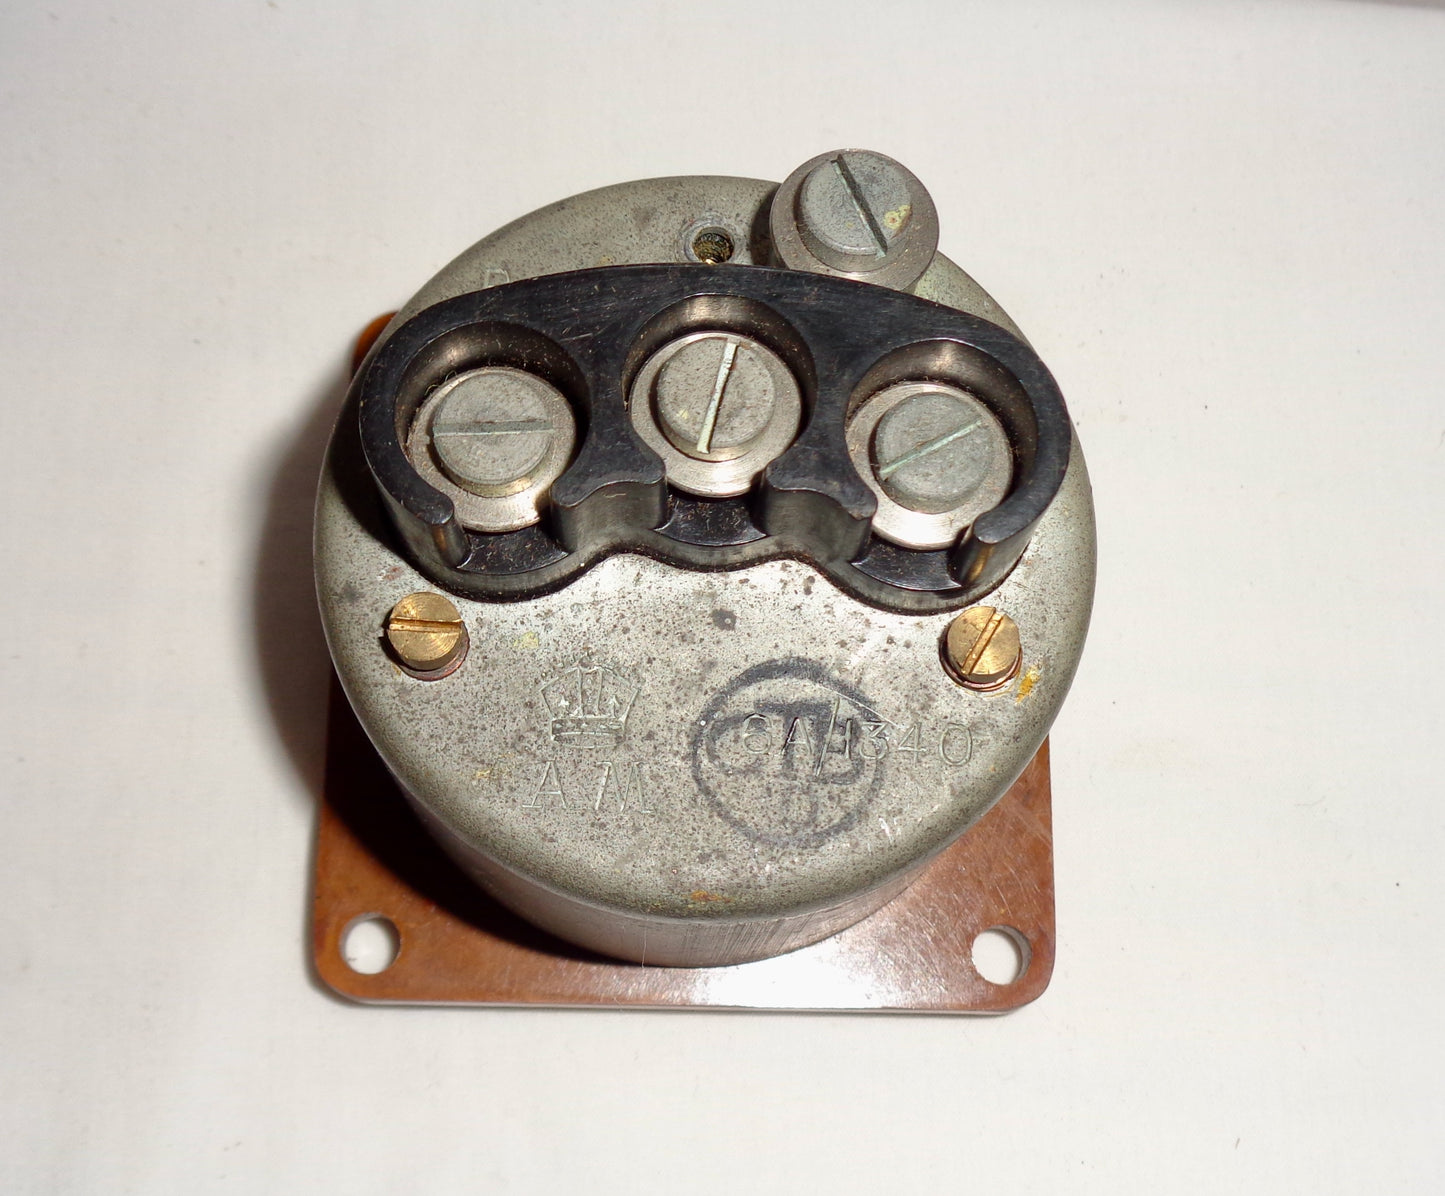 1940s Bakelite Air Ministry 6A/1340 RAF Aircraft Oil Thermometer 12 Volt Cockpit Gauge. Made By Coley